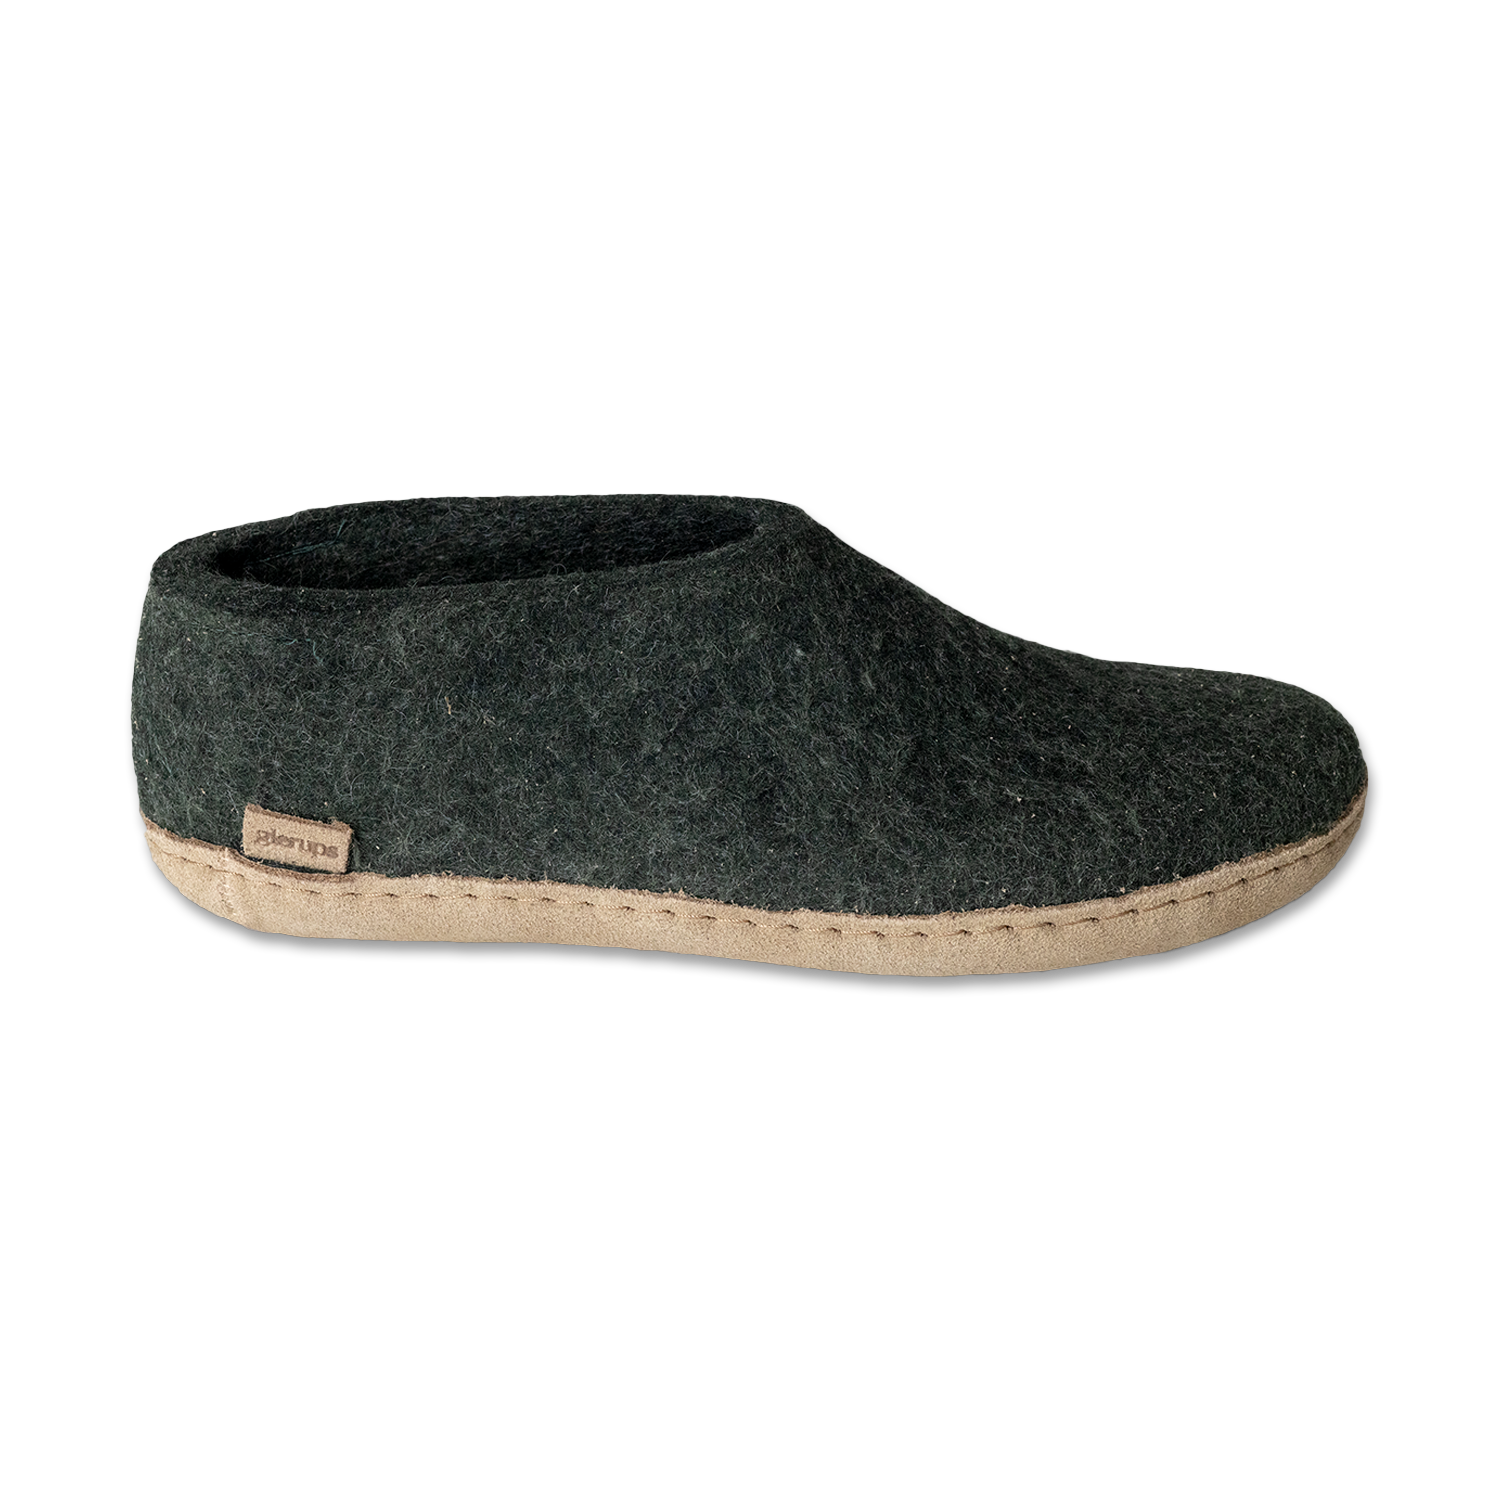 Glerups Shoe Forest Green - Leather Sole